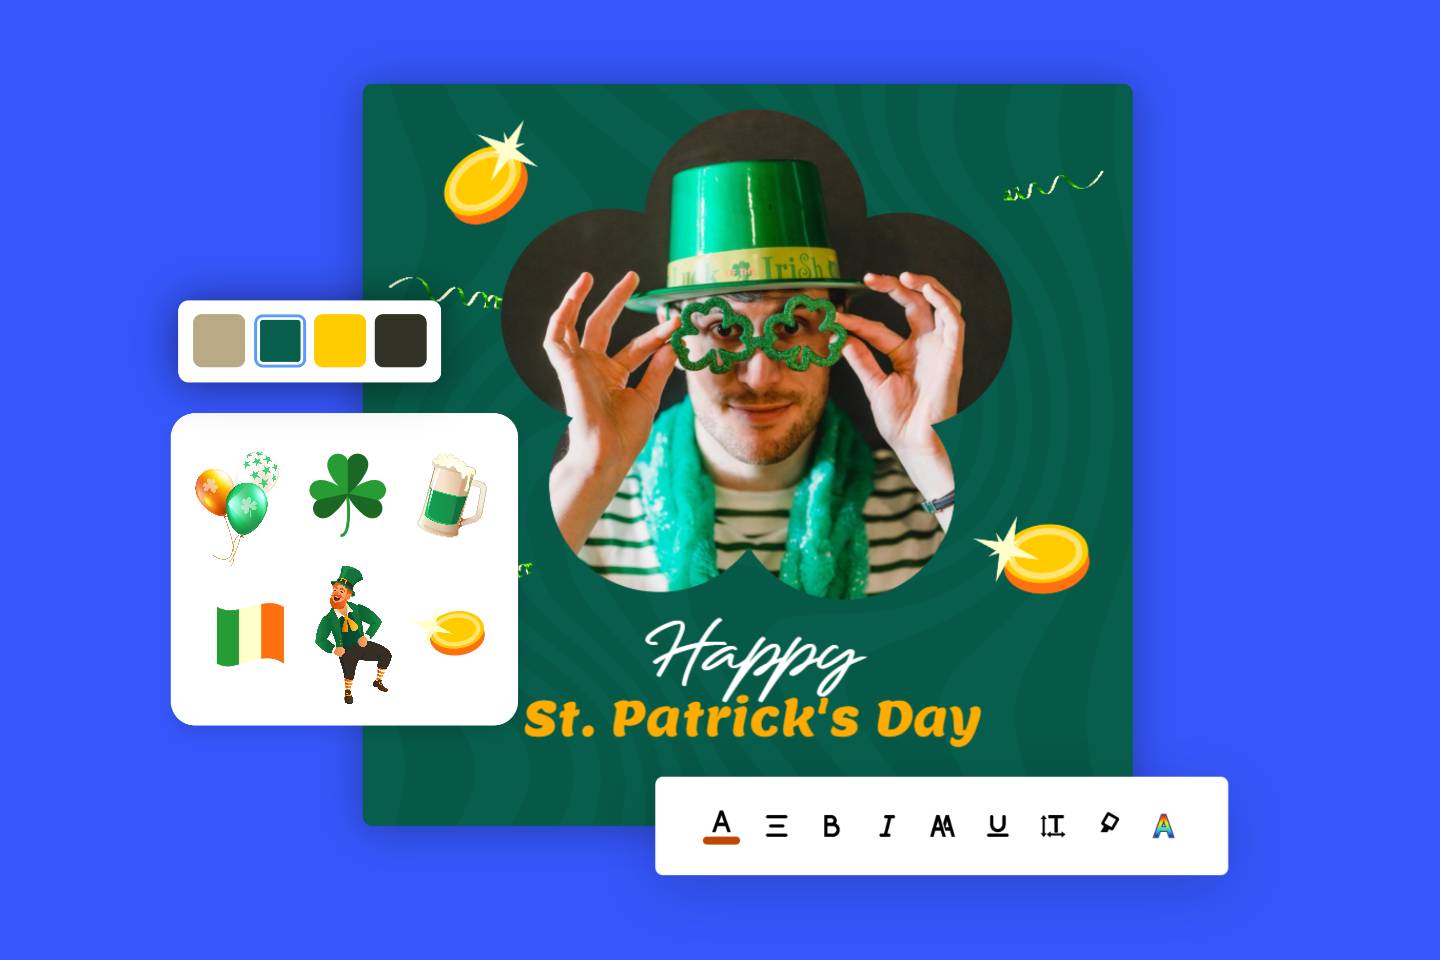 Make a saint patricks day photo with green frame font and stickers